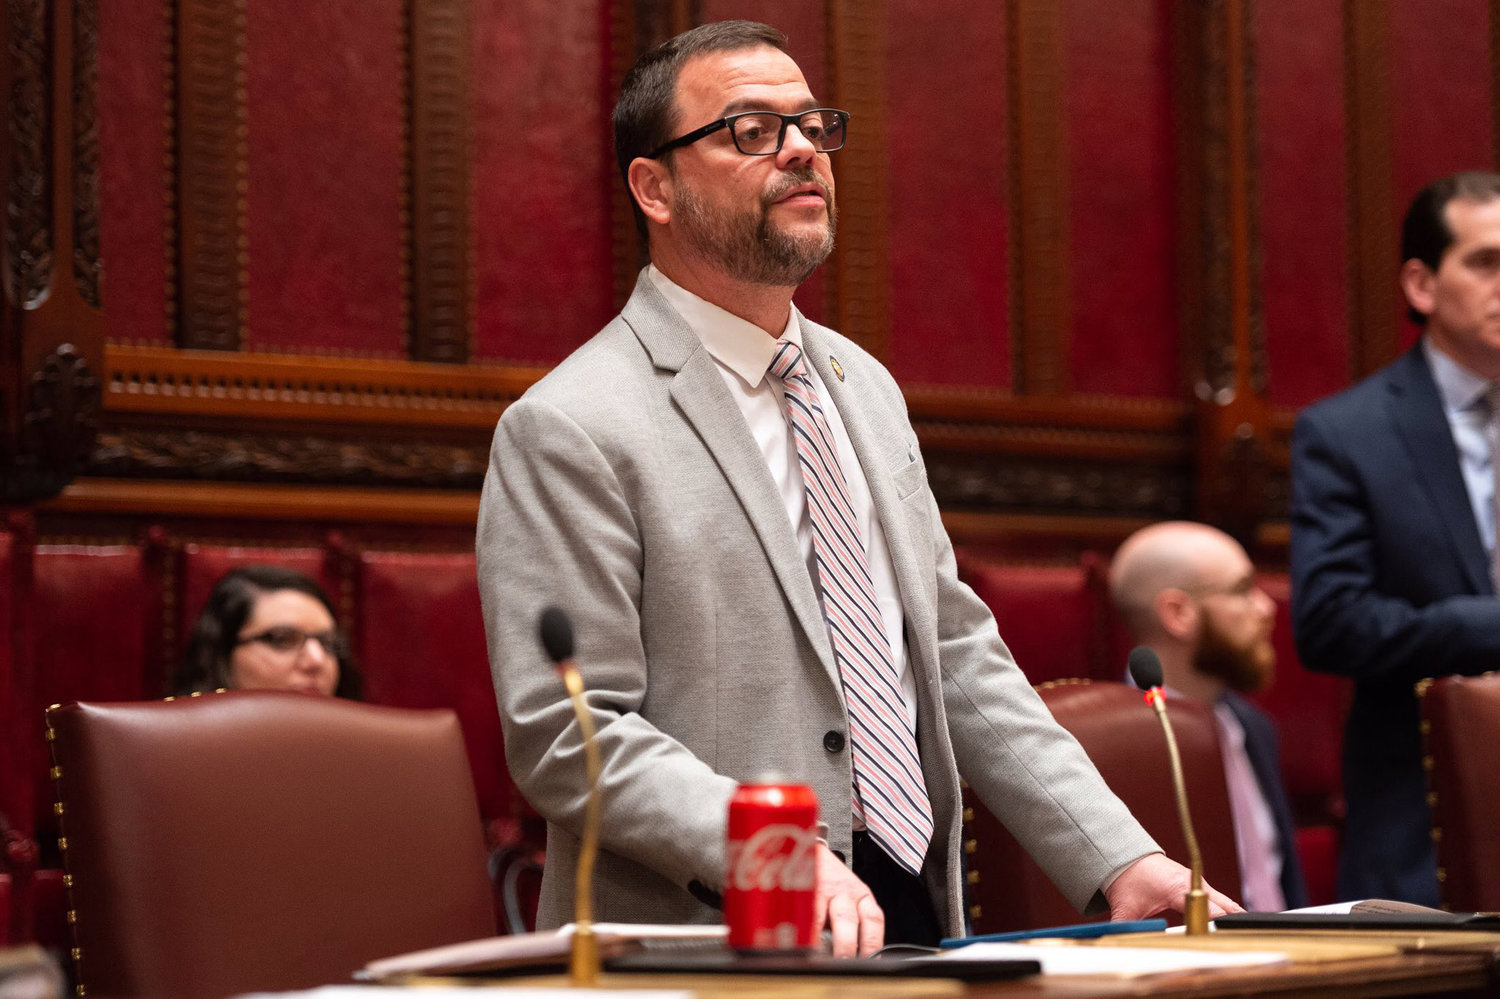 State Sen. Luis Sepúlveda was arrested for allegedly strangled his wife last Tuesday, drawing swift condemnation from many of his colleagues — including state Sen. Alessandra Biaggi. Majority Leader Andrea Stewart-Cousins quickly stripped Sepúlveda of his senate committee chairs and assignments by, although he has denied the allegations.